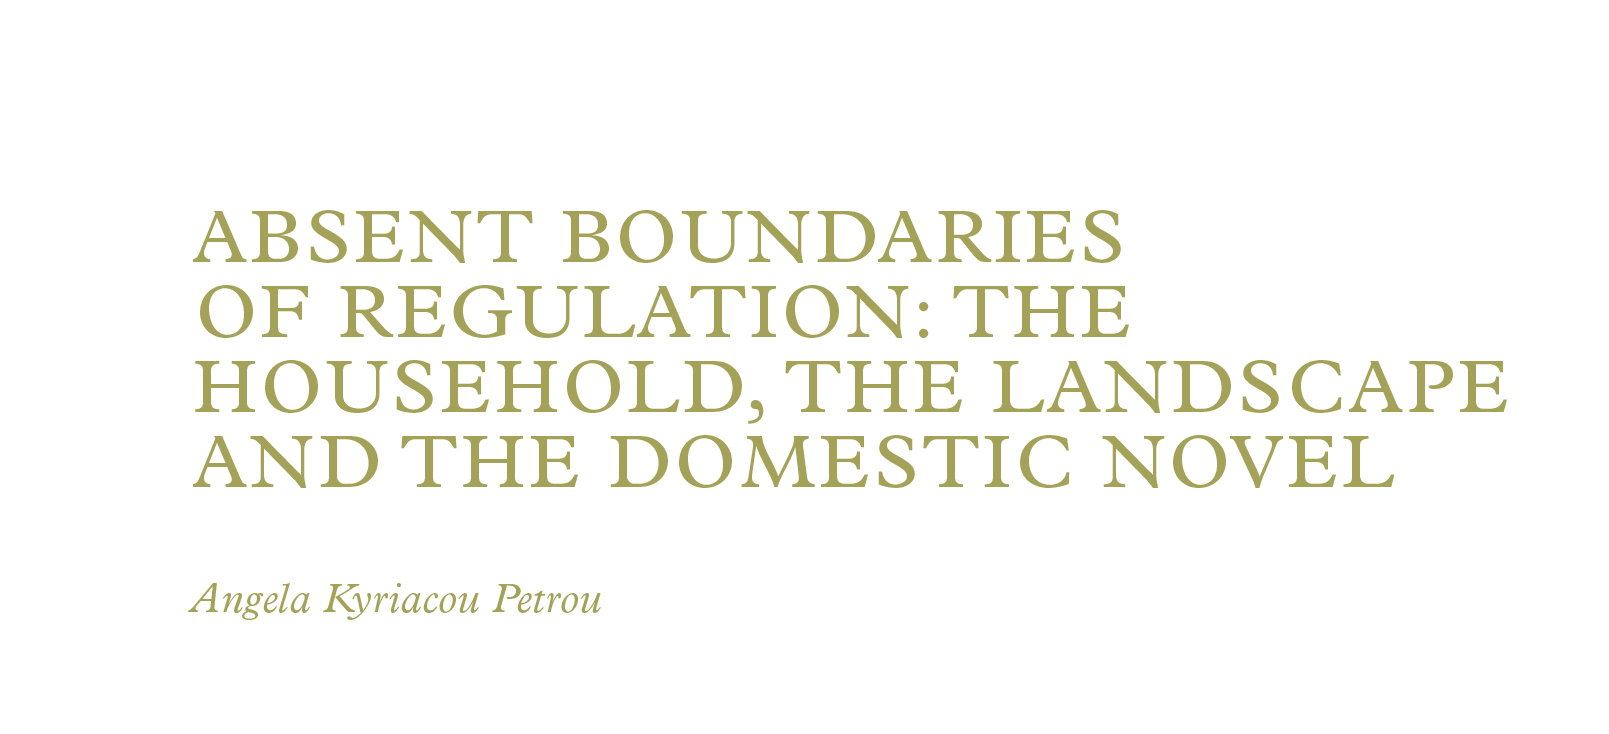 Absent Boundaries of Regulation: the Household, the Landscape and the Domestic Novel